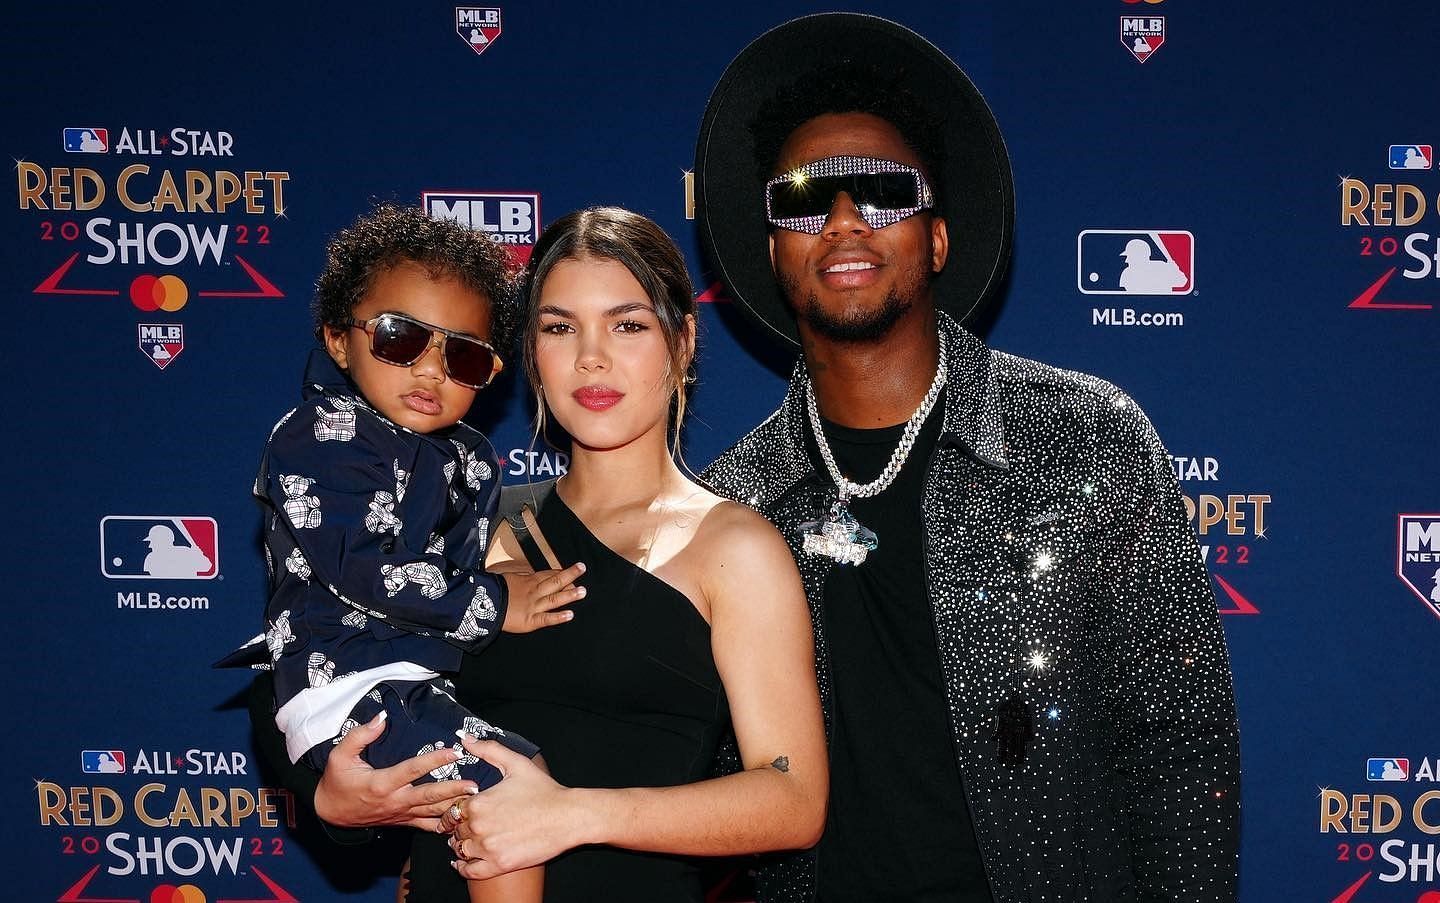 Ronald acuna fiancee Maria Laborde: Who is Ronald Acuna Jr.'s fiancée,  Maria Laborde? A glimpse into the personal life of Atlanta Braves star